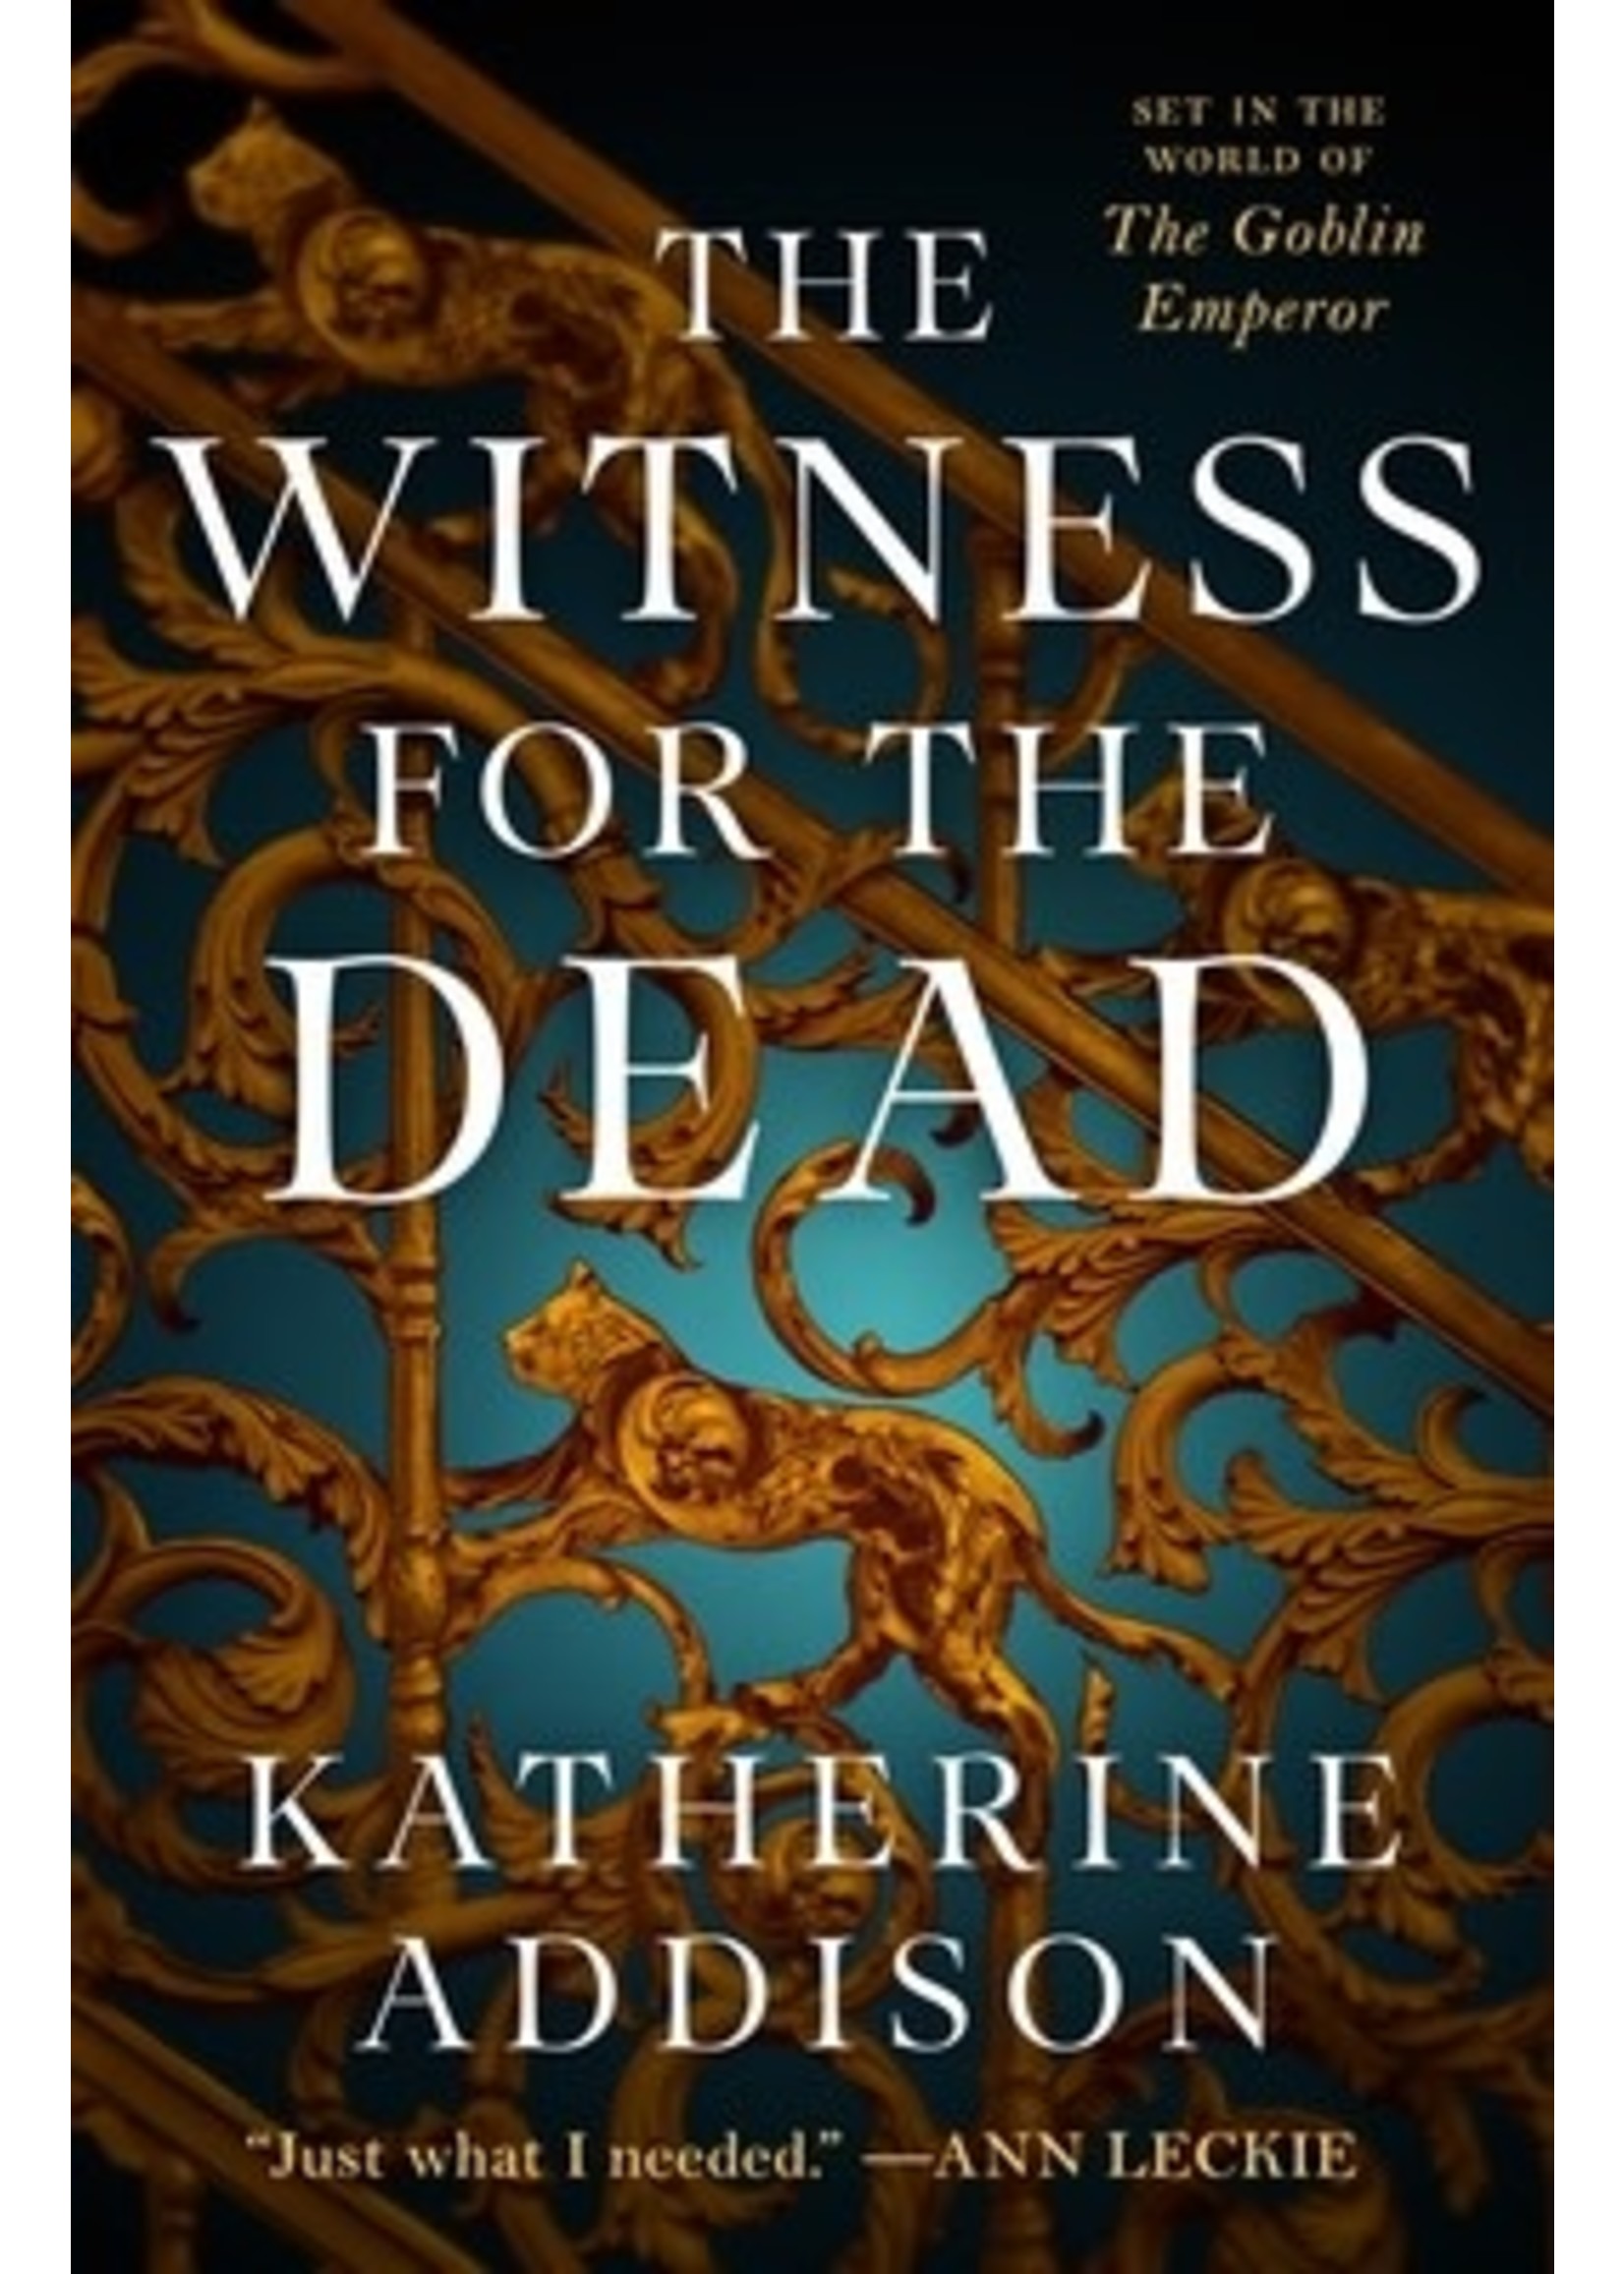 The Witness for the Dead (The Cemeteries of Amalo #1) by Katherine Addison